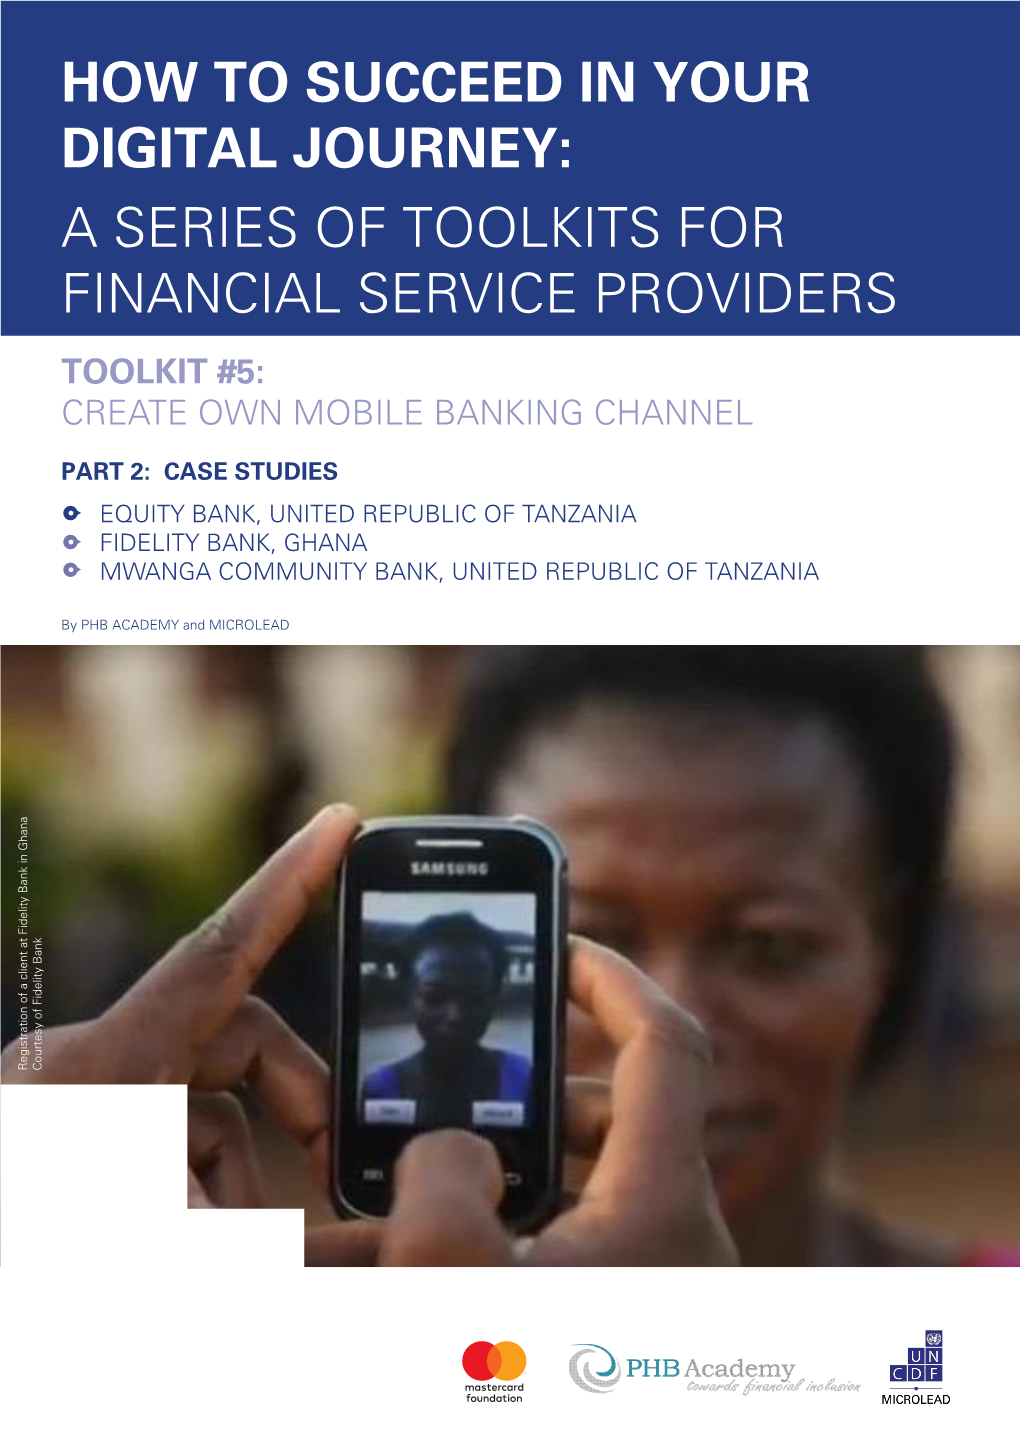 A Series of Toolkits for Financial Service Providers